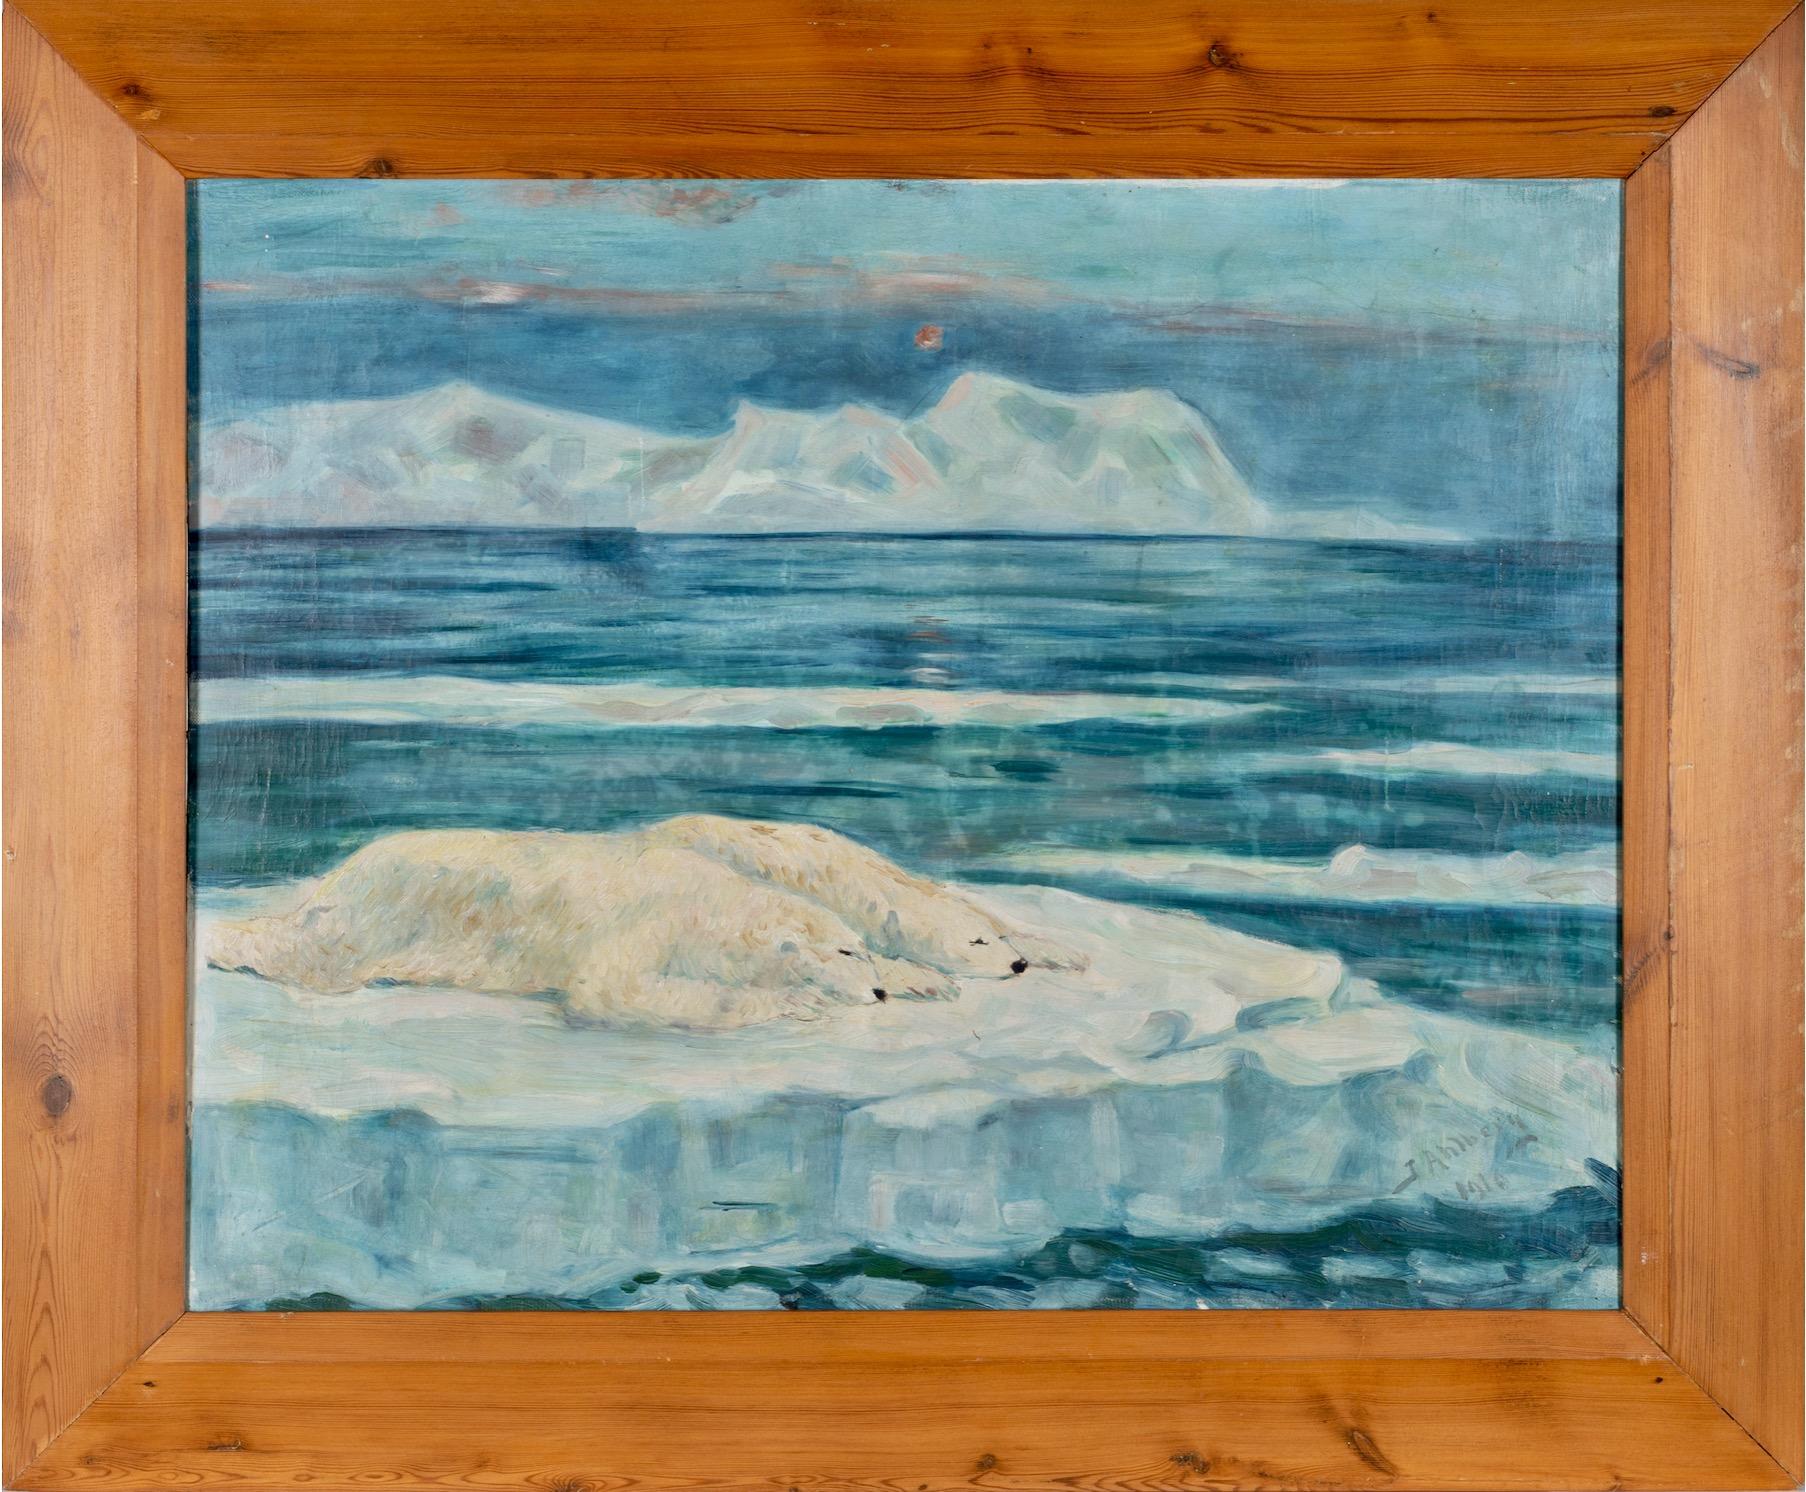 A fine painting by John Ahlberg, signed and dated 1910 of two polar bears sleeping on the ice in the Arctic with icebergs in the background and some floes of ice floating the open sea. The Arctic was a popular topic at the turn of the century with